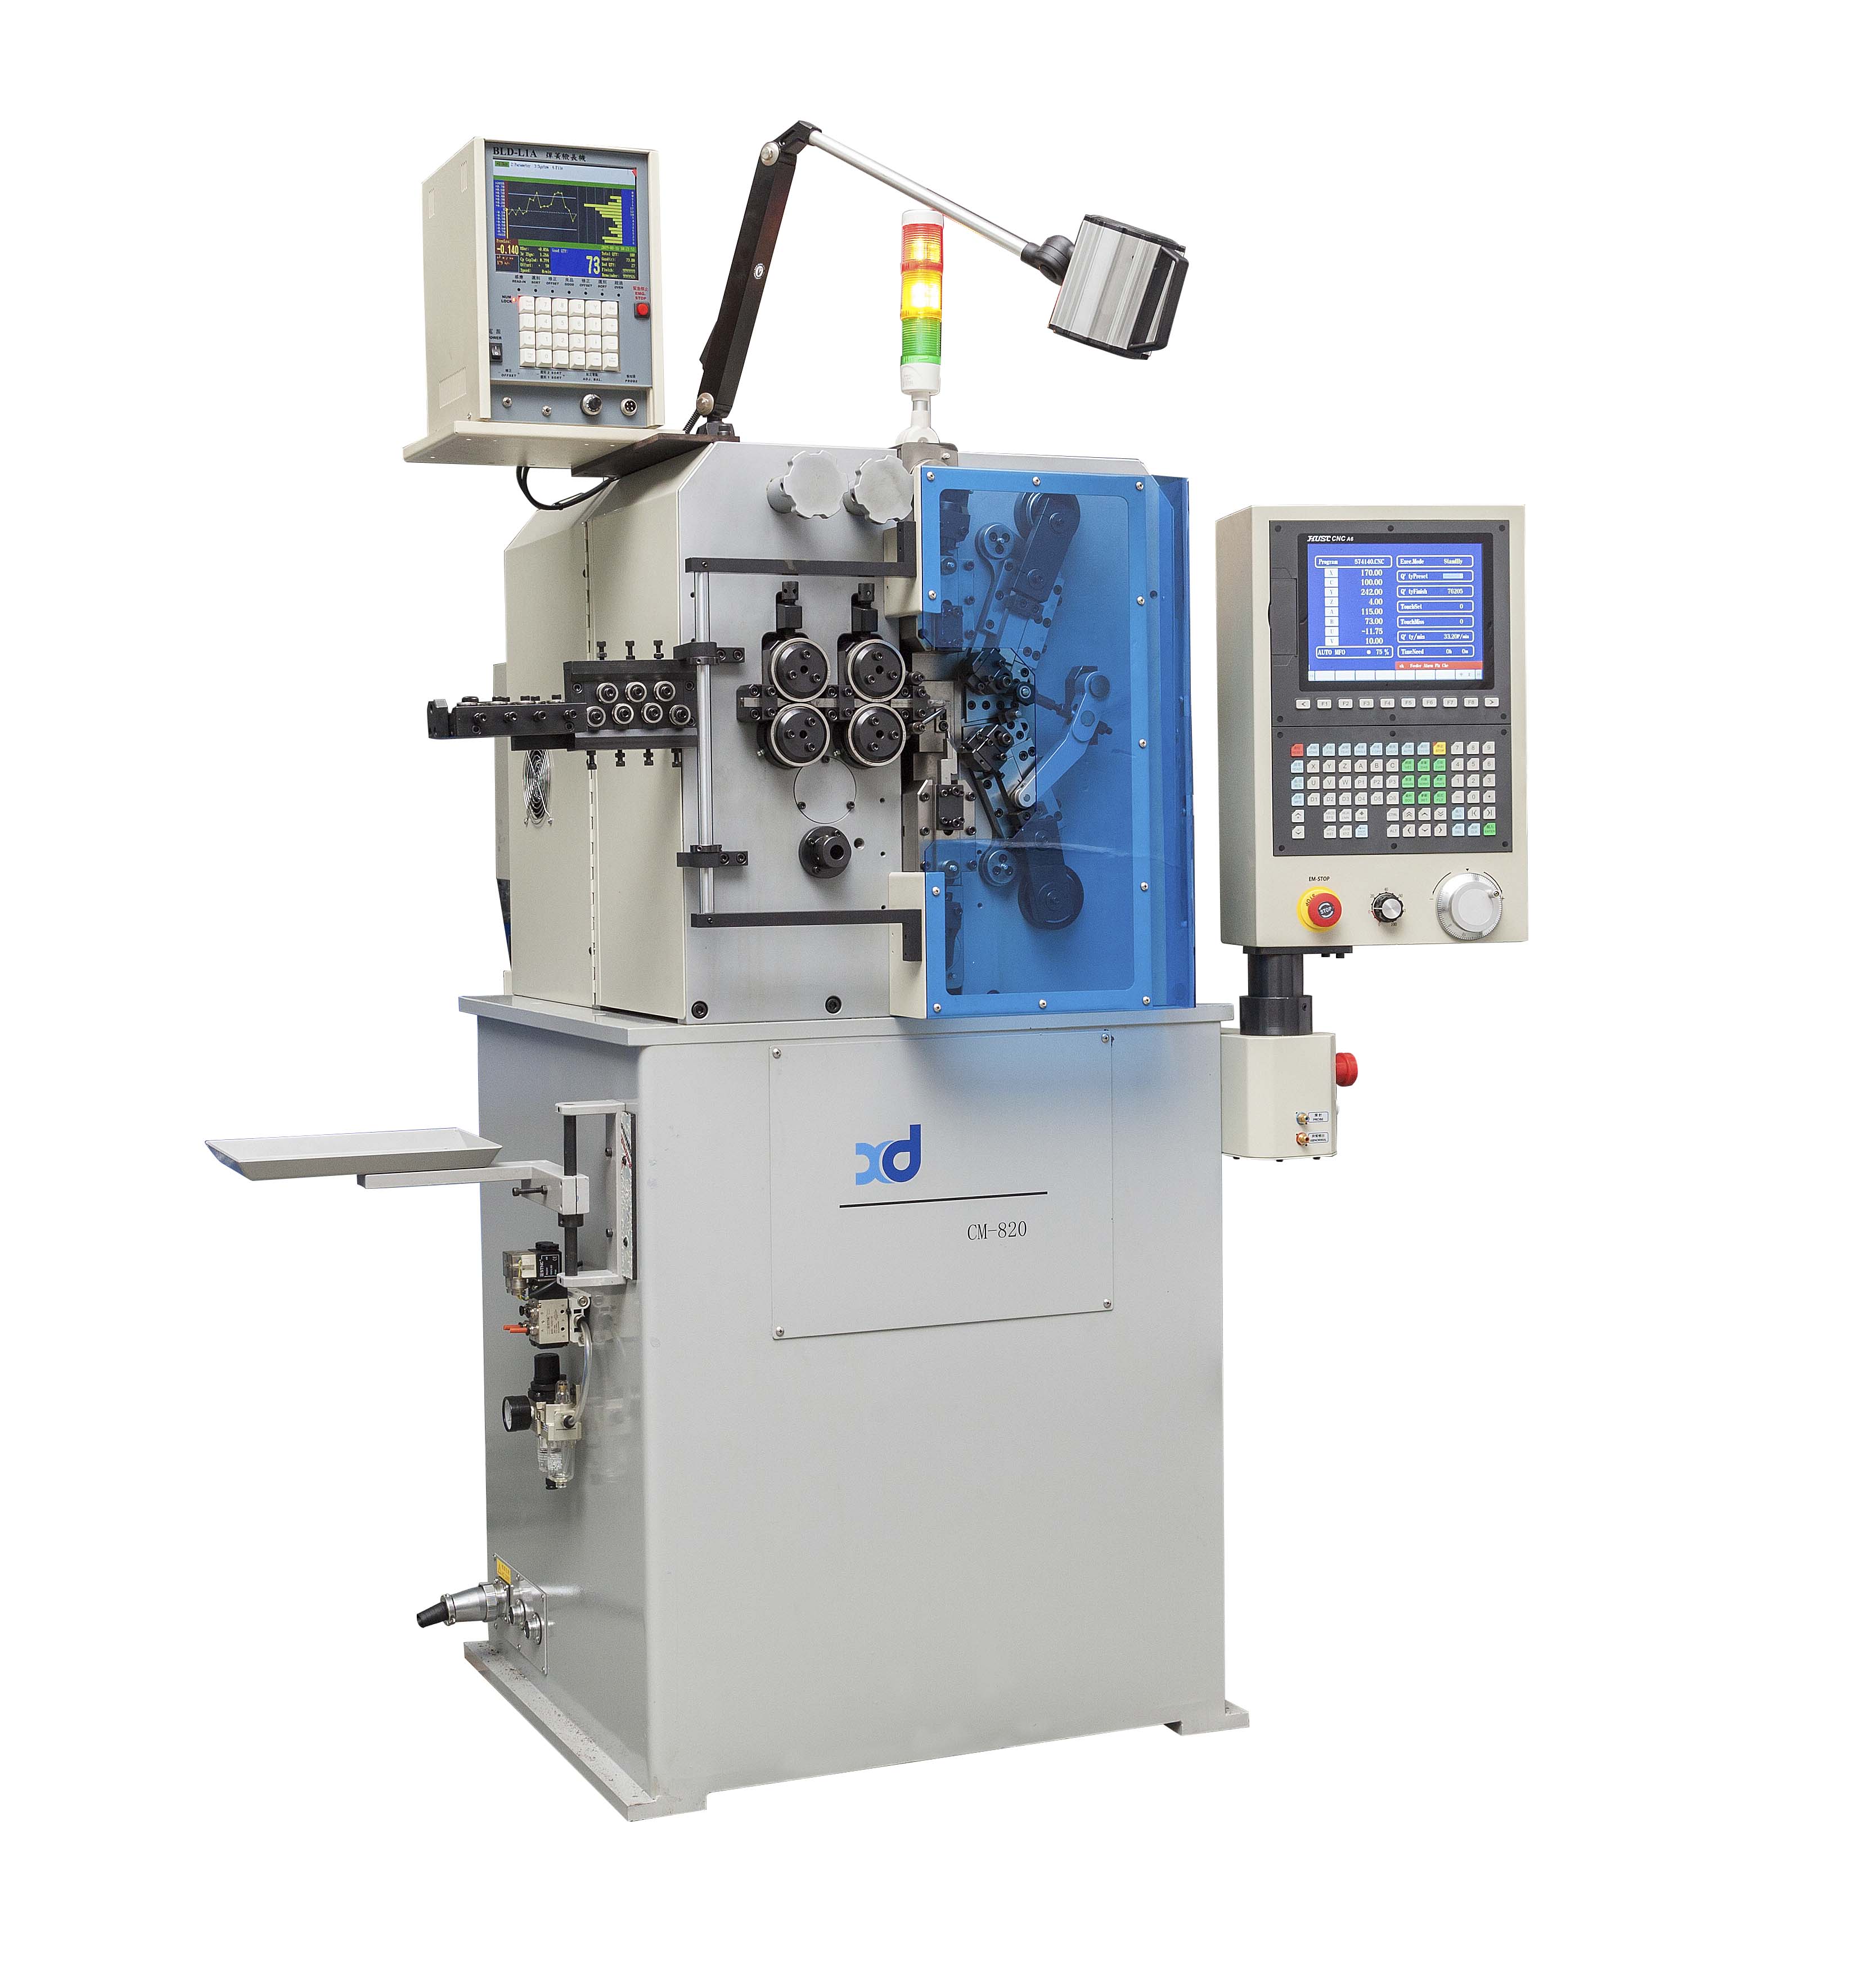 xd-820 for compression spring production